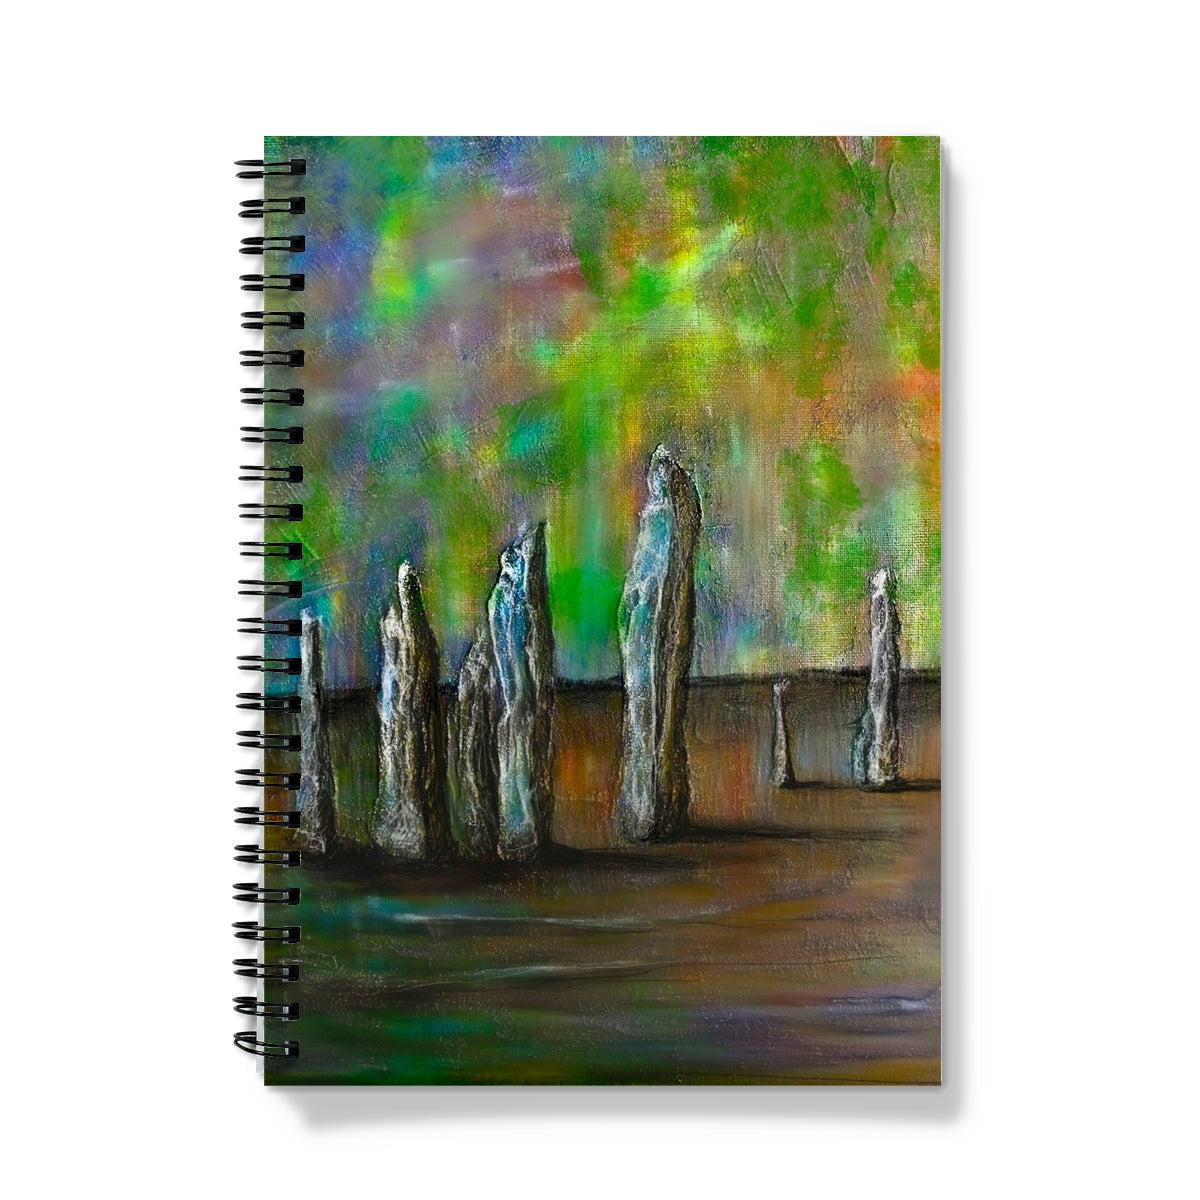 Callanish Northern Lights Art Gifts Notebook-Journals & Notebooks-Hebridean Islands Art Gallery-A5-Lined-Paintings, Prints, Homeware, Art Gifts From Scotland By Scottish Artist Kevin Hunter